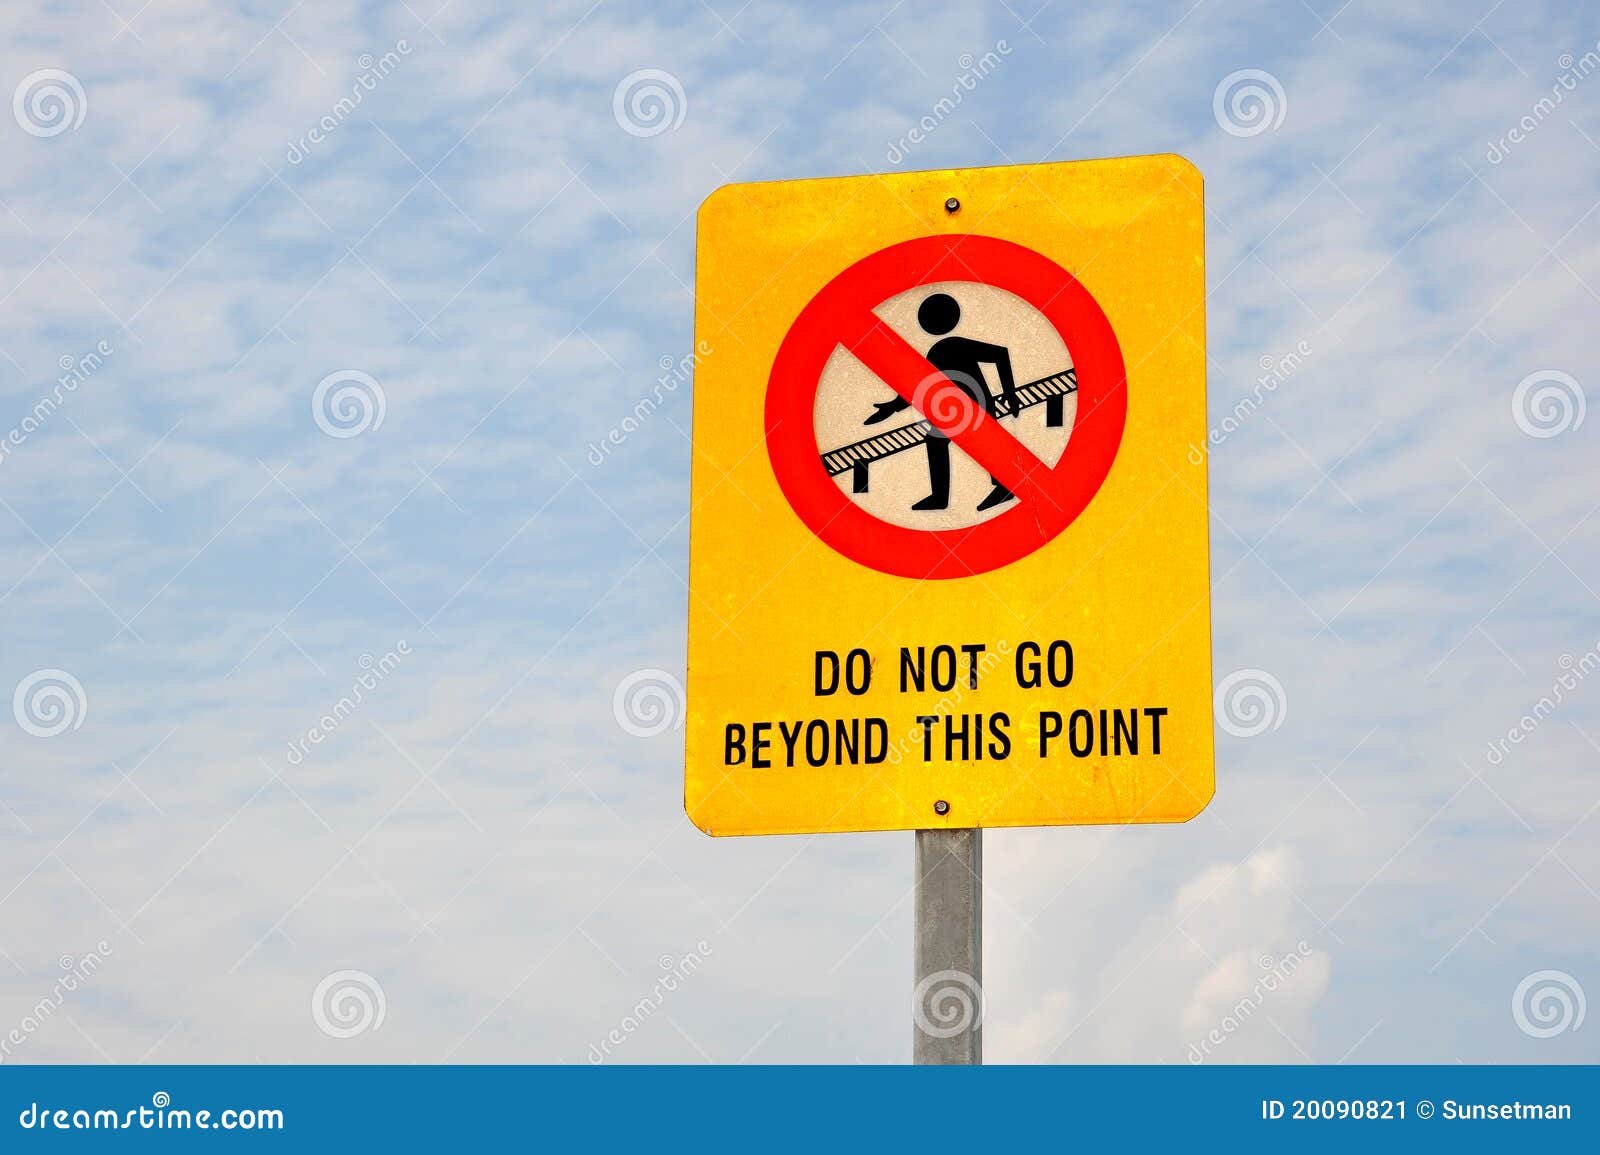 do not go beyond this point